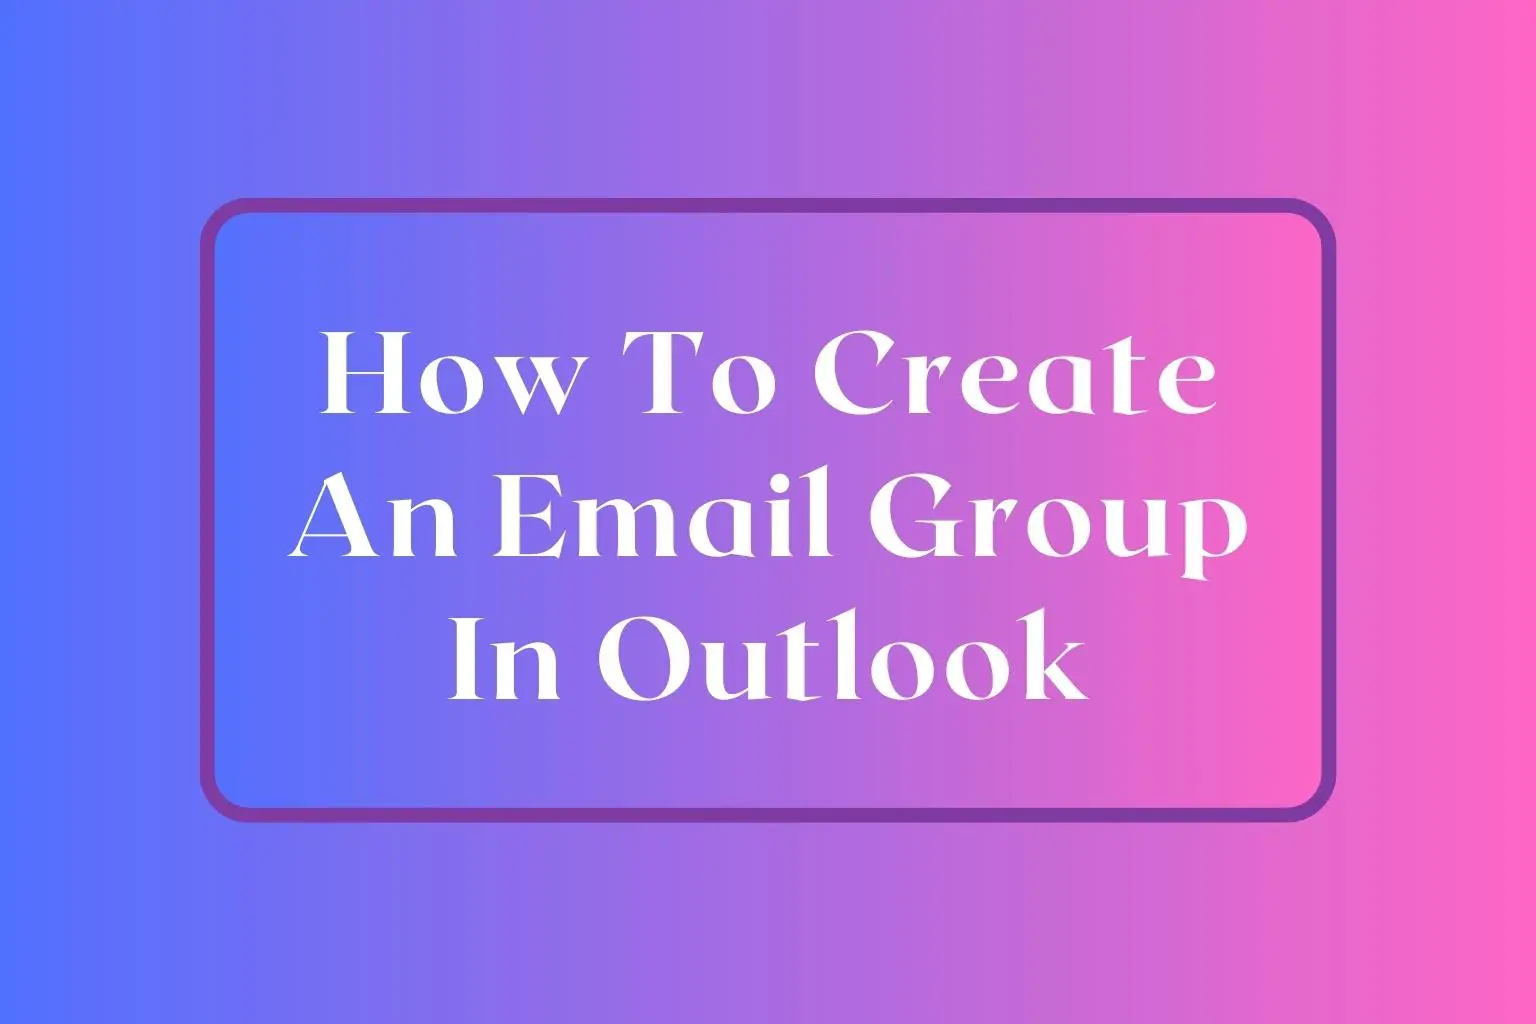 How To Create An Email Group In Outlook